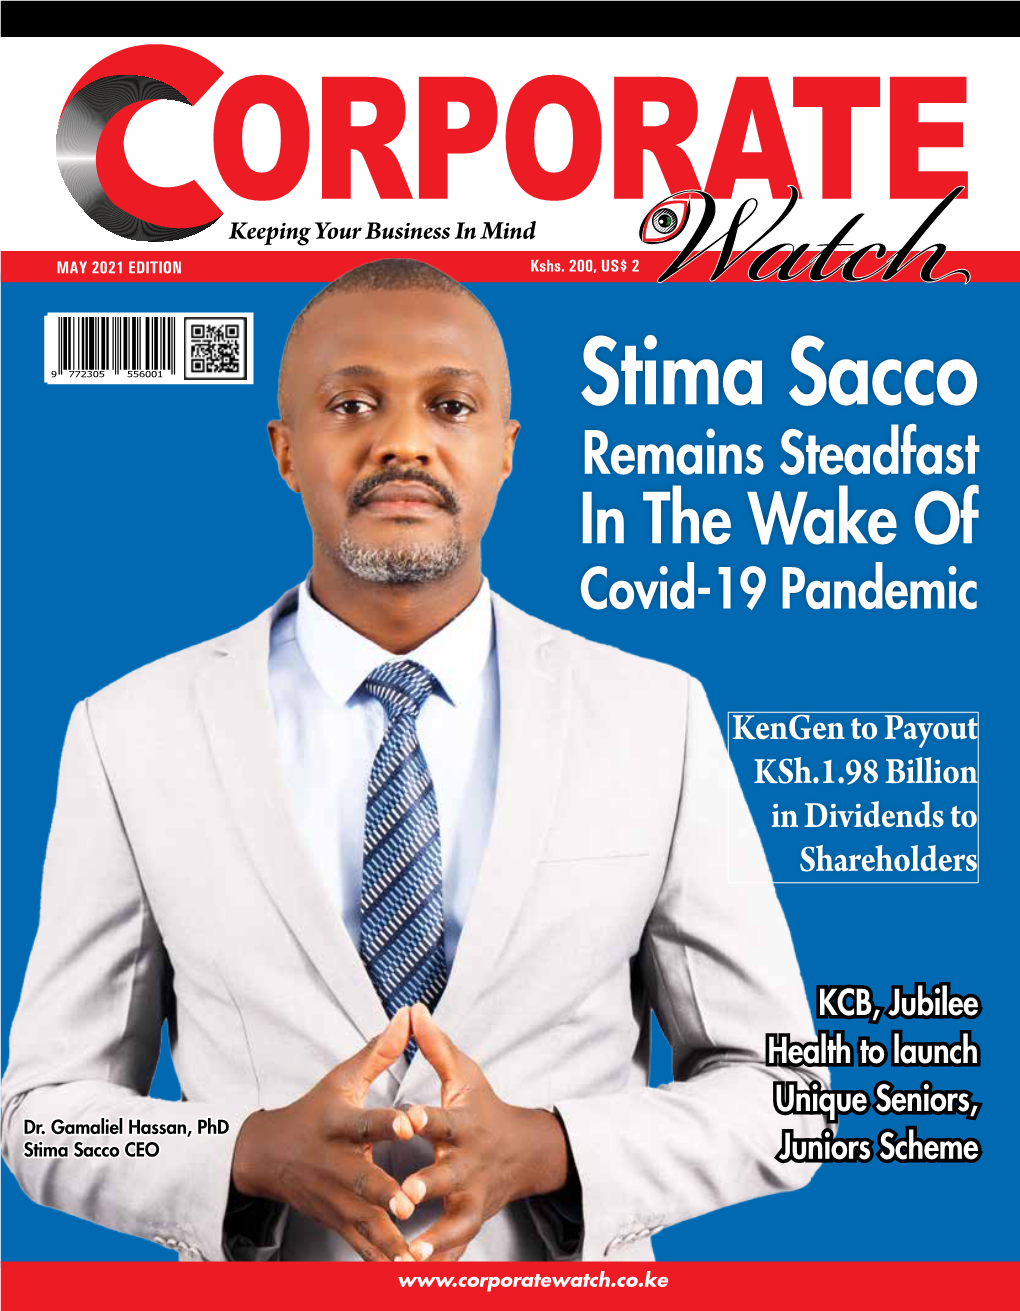 Stima Sacco Remains Steadfast in the Wake Of